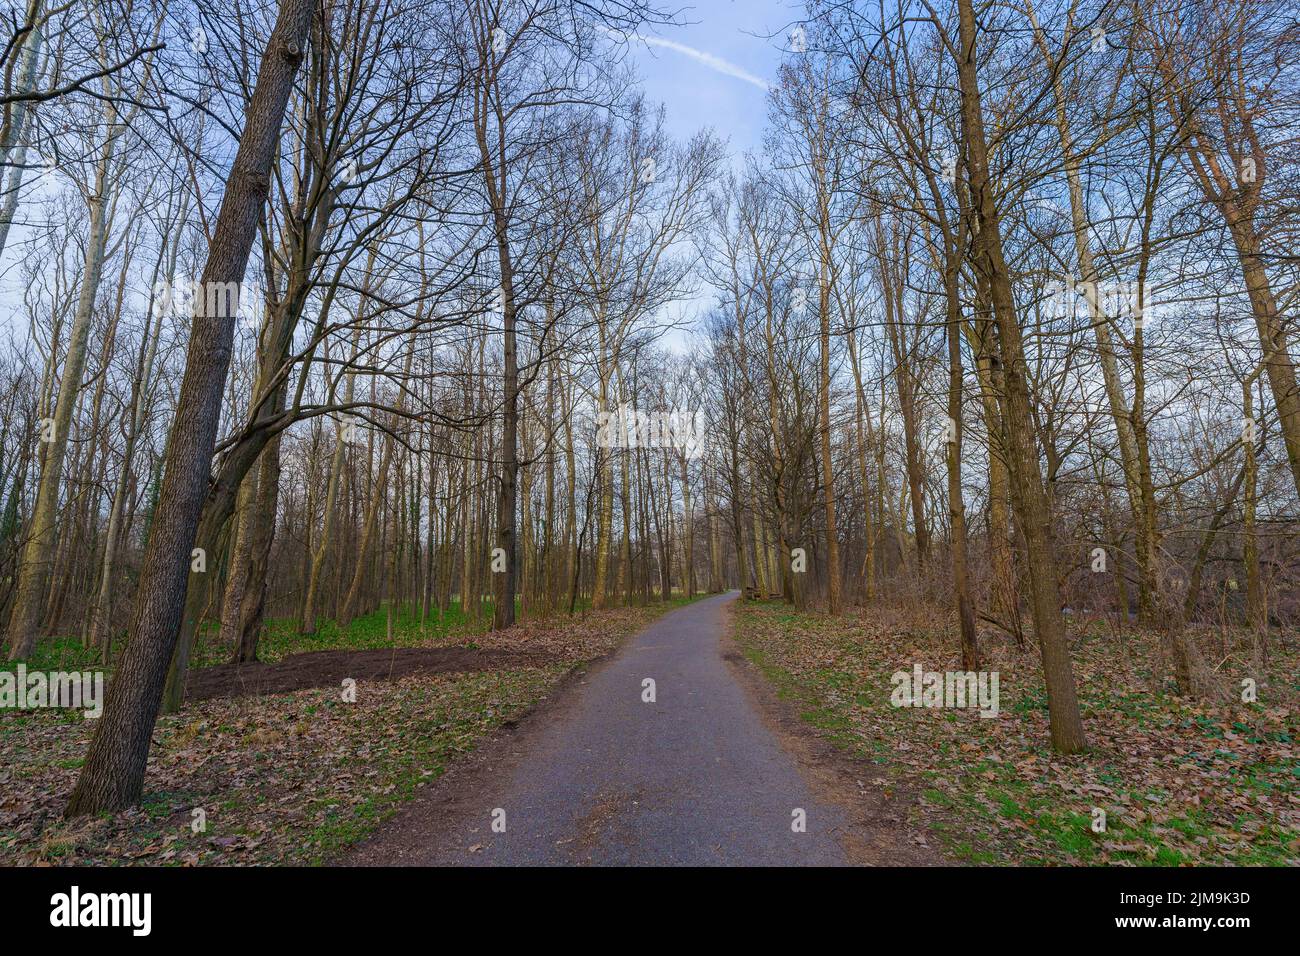 View of a footpath and trees in the Monza Park, on a clear winter day. Monza, Lombardy, Northern Italy Stock Photo